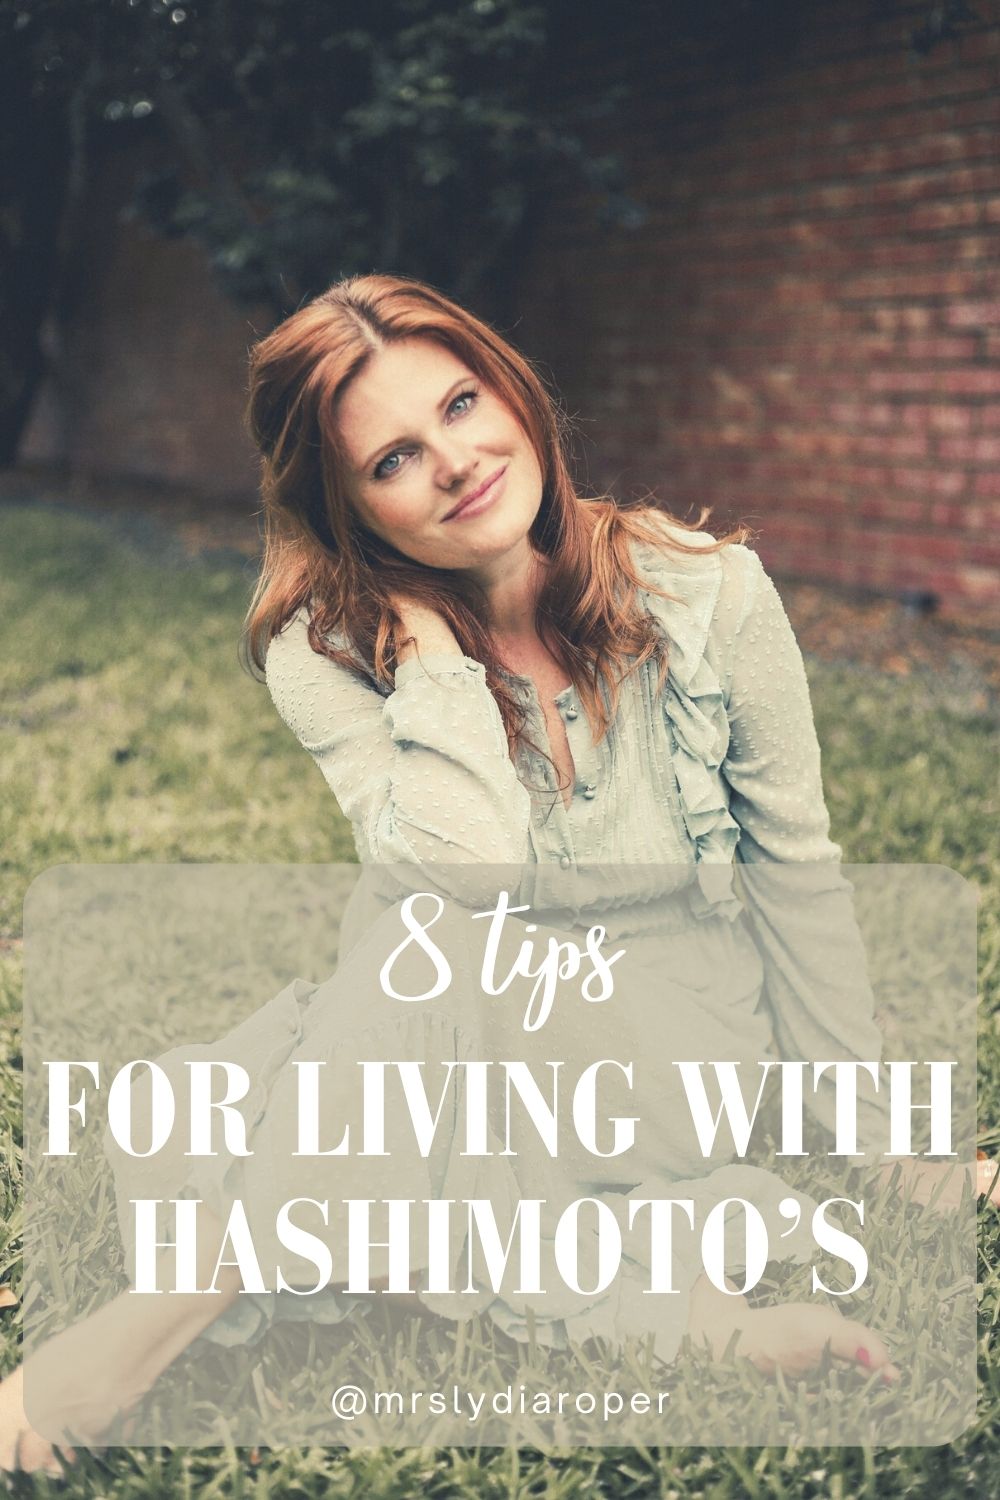 8 tips for living with Hashimoto's